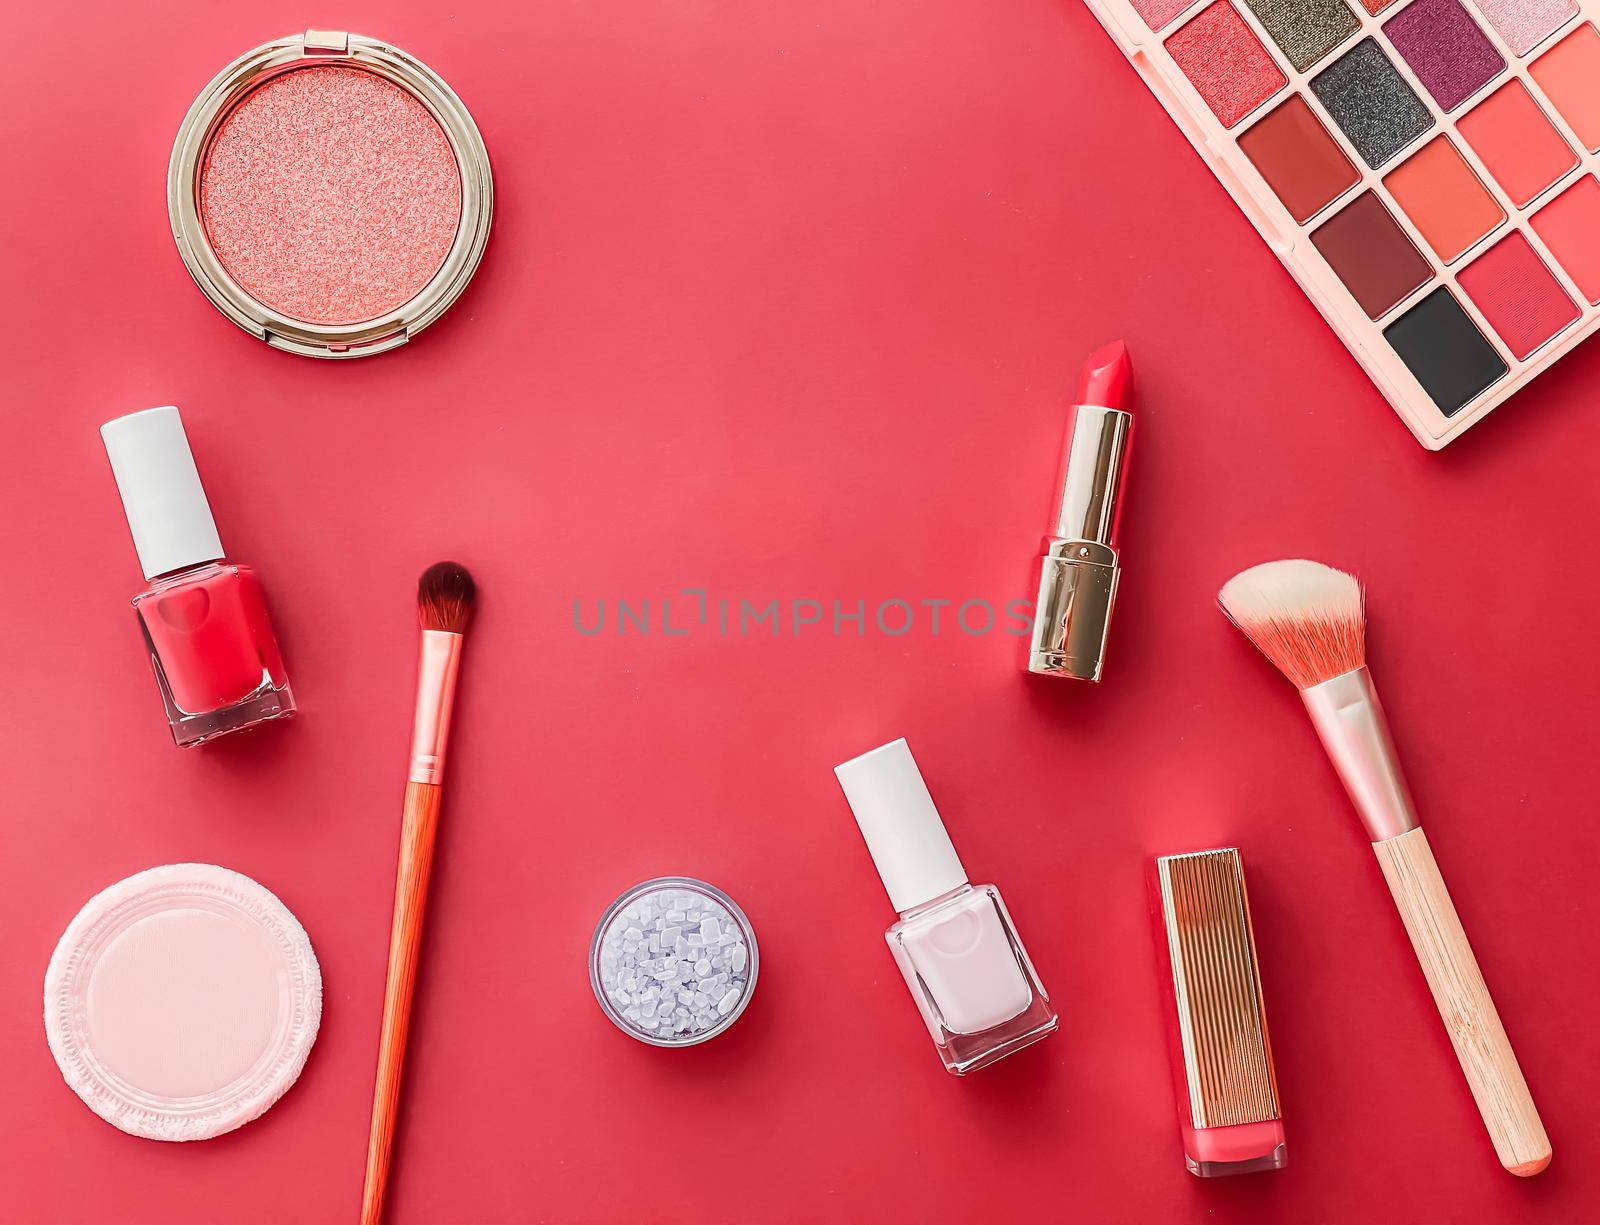 Beauty, make-up and cosmetics flatlay design with copyspace, cosmetic products and makeup tools on coral background, girly and feminine style by Anneleven